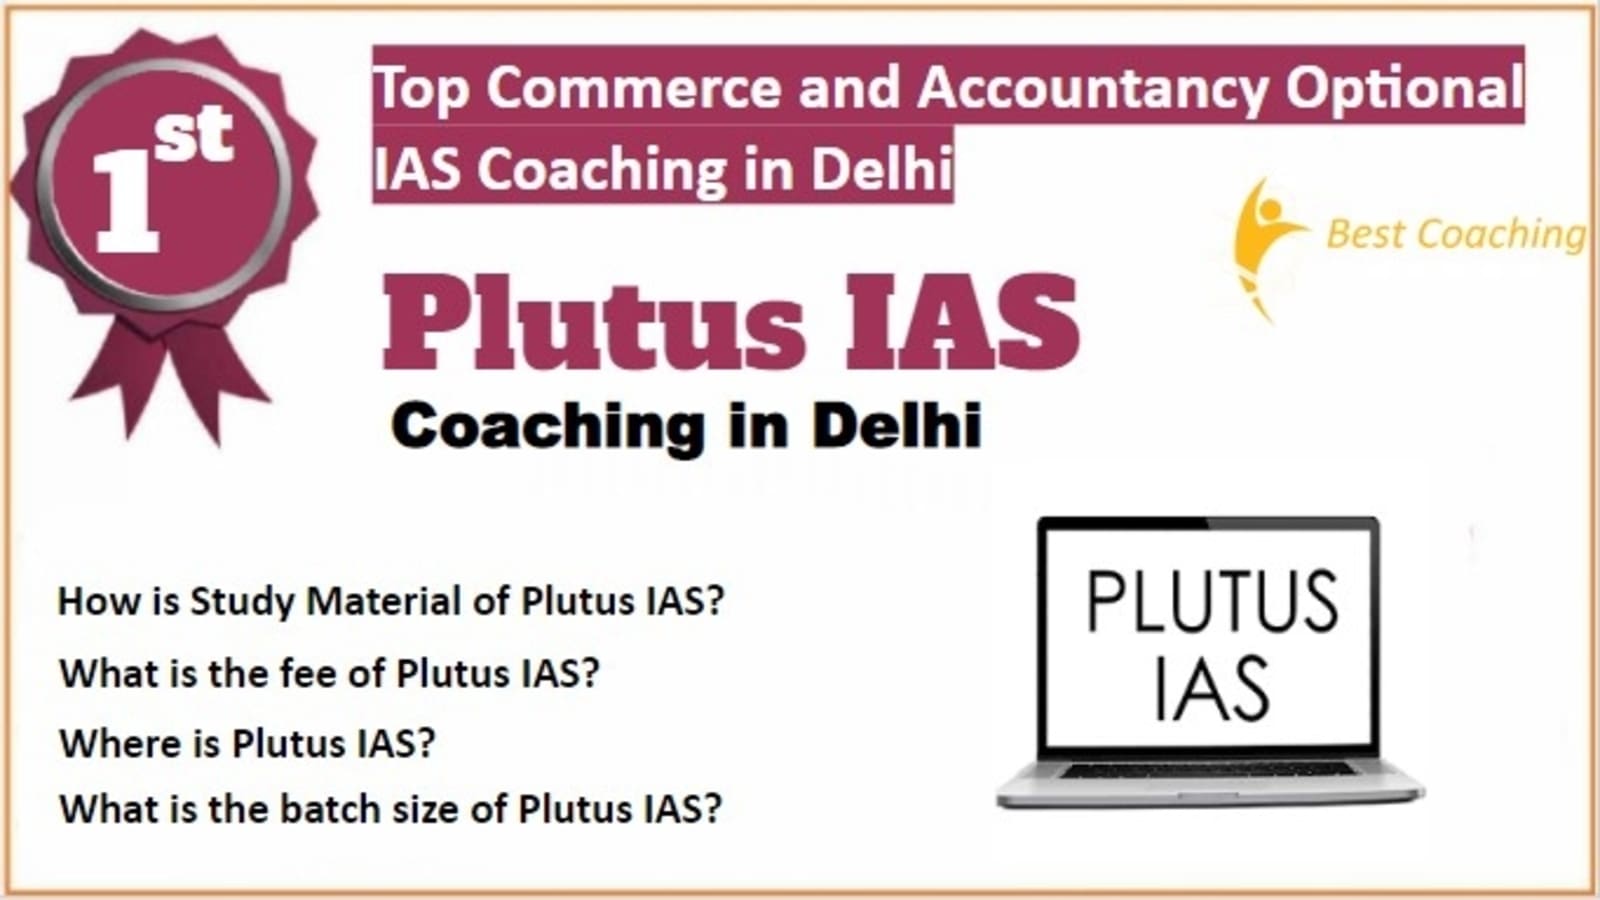 Rank 1 Best Commerce and Accountancy Optional IAS Coaching in Delhi